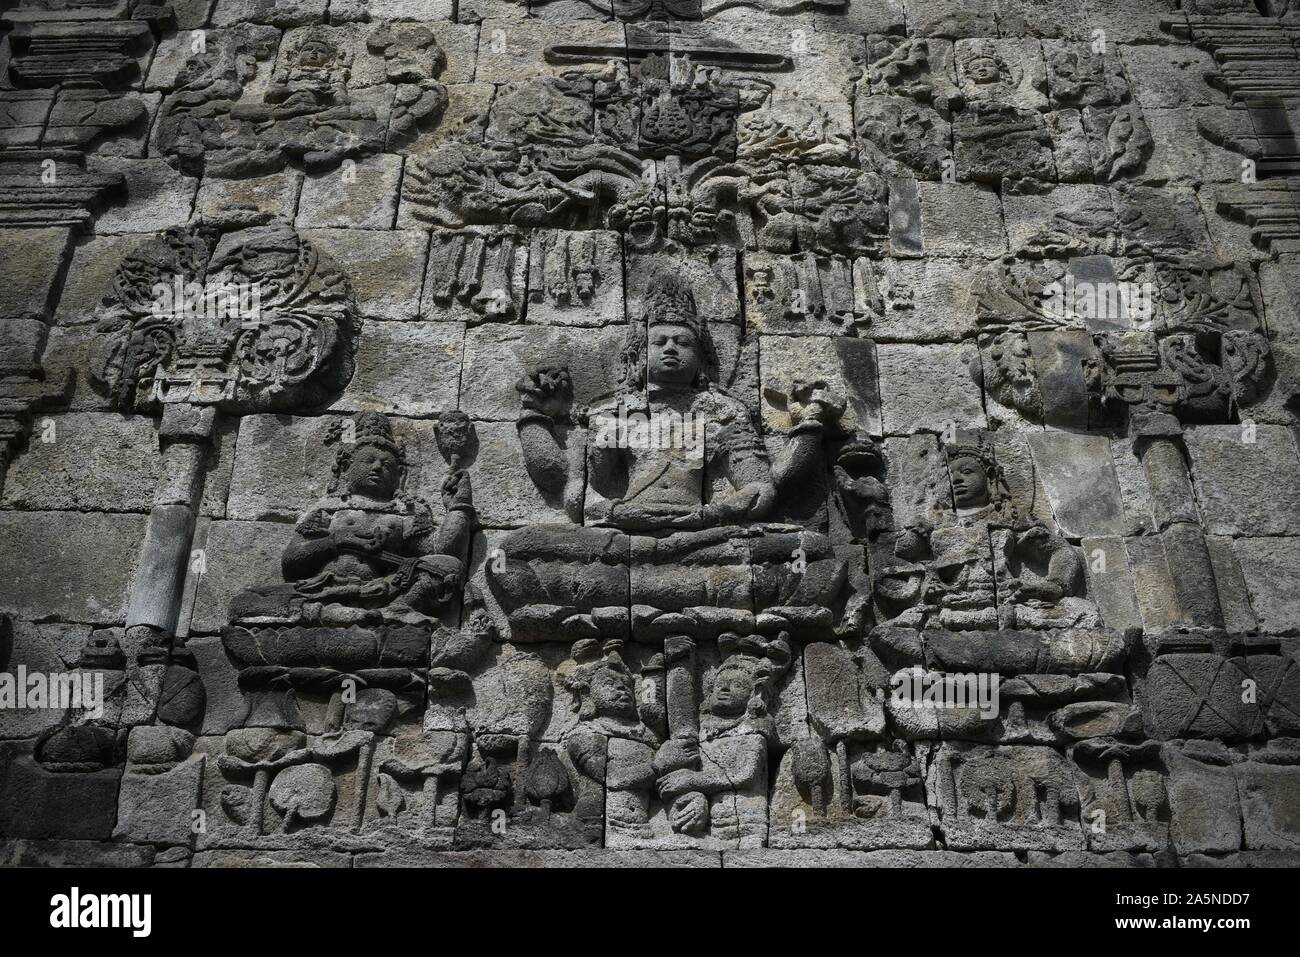 Bas-reliefs at Mendut Temple, Central Java, Indonesia. Stock Photo